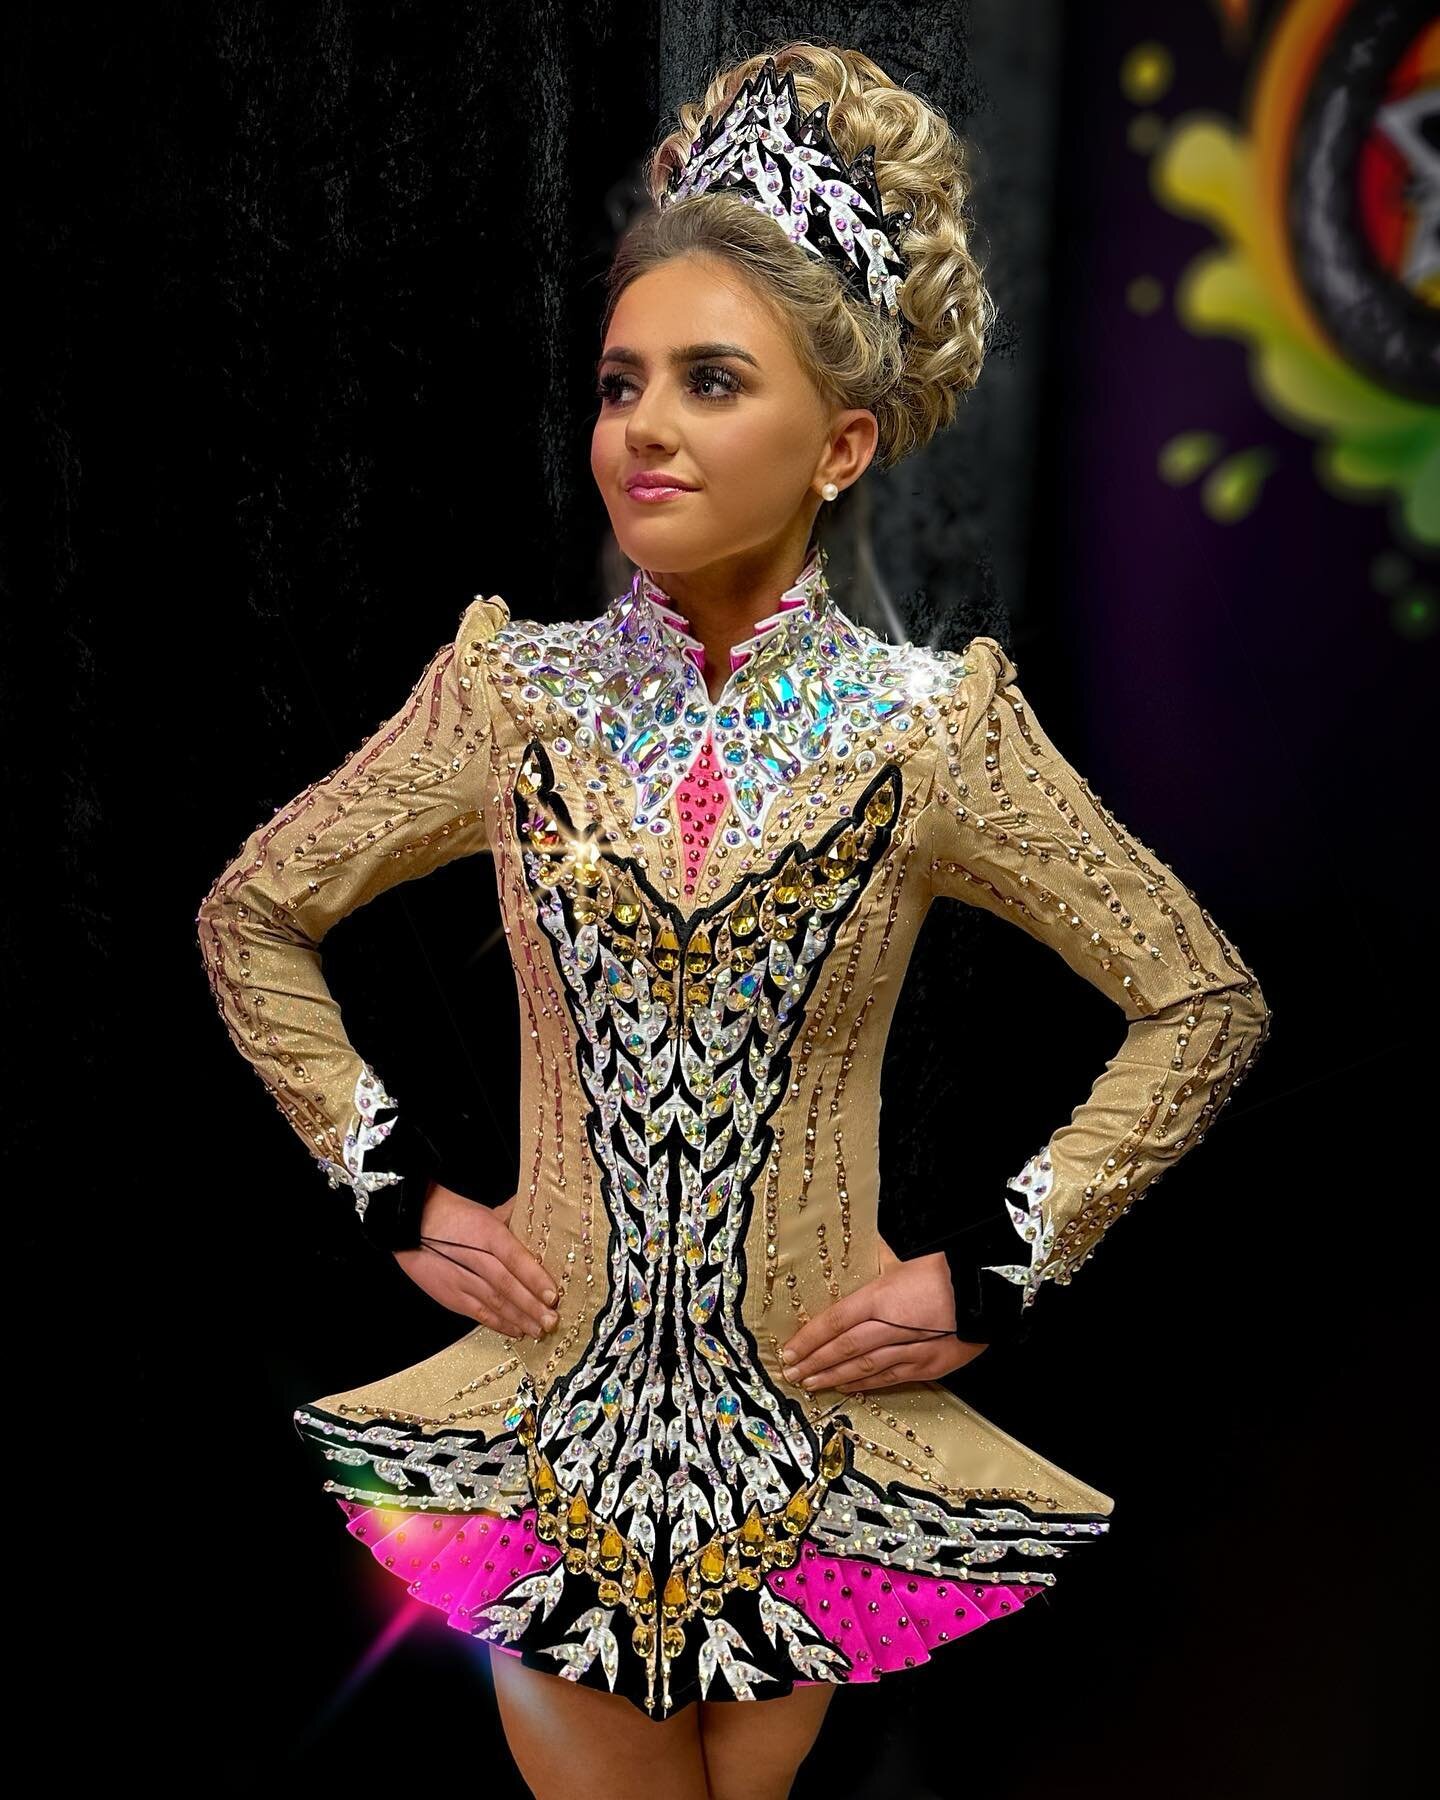 Aoibhe Hoary
@theacademyirishdance 

Consider Rising Star for your next Costume by getting in touch for a free no obligation quote today. We specialise in Unique Costumes for all dancers worldwide. 

Accepting orders for delivery/fitting May 2023 onw